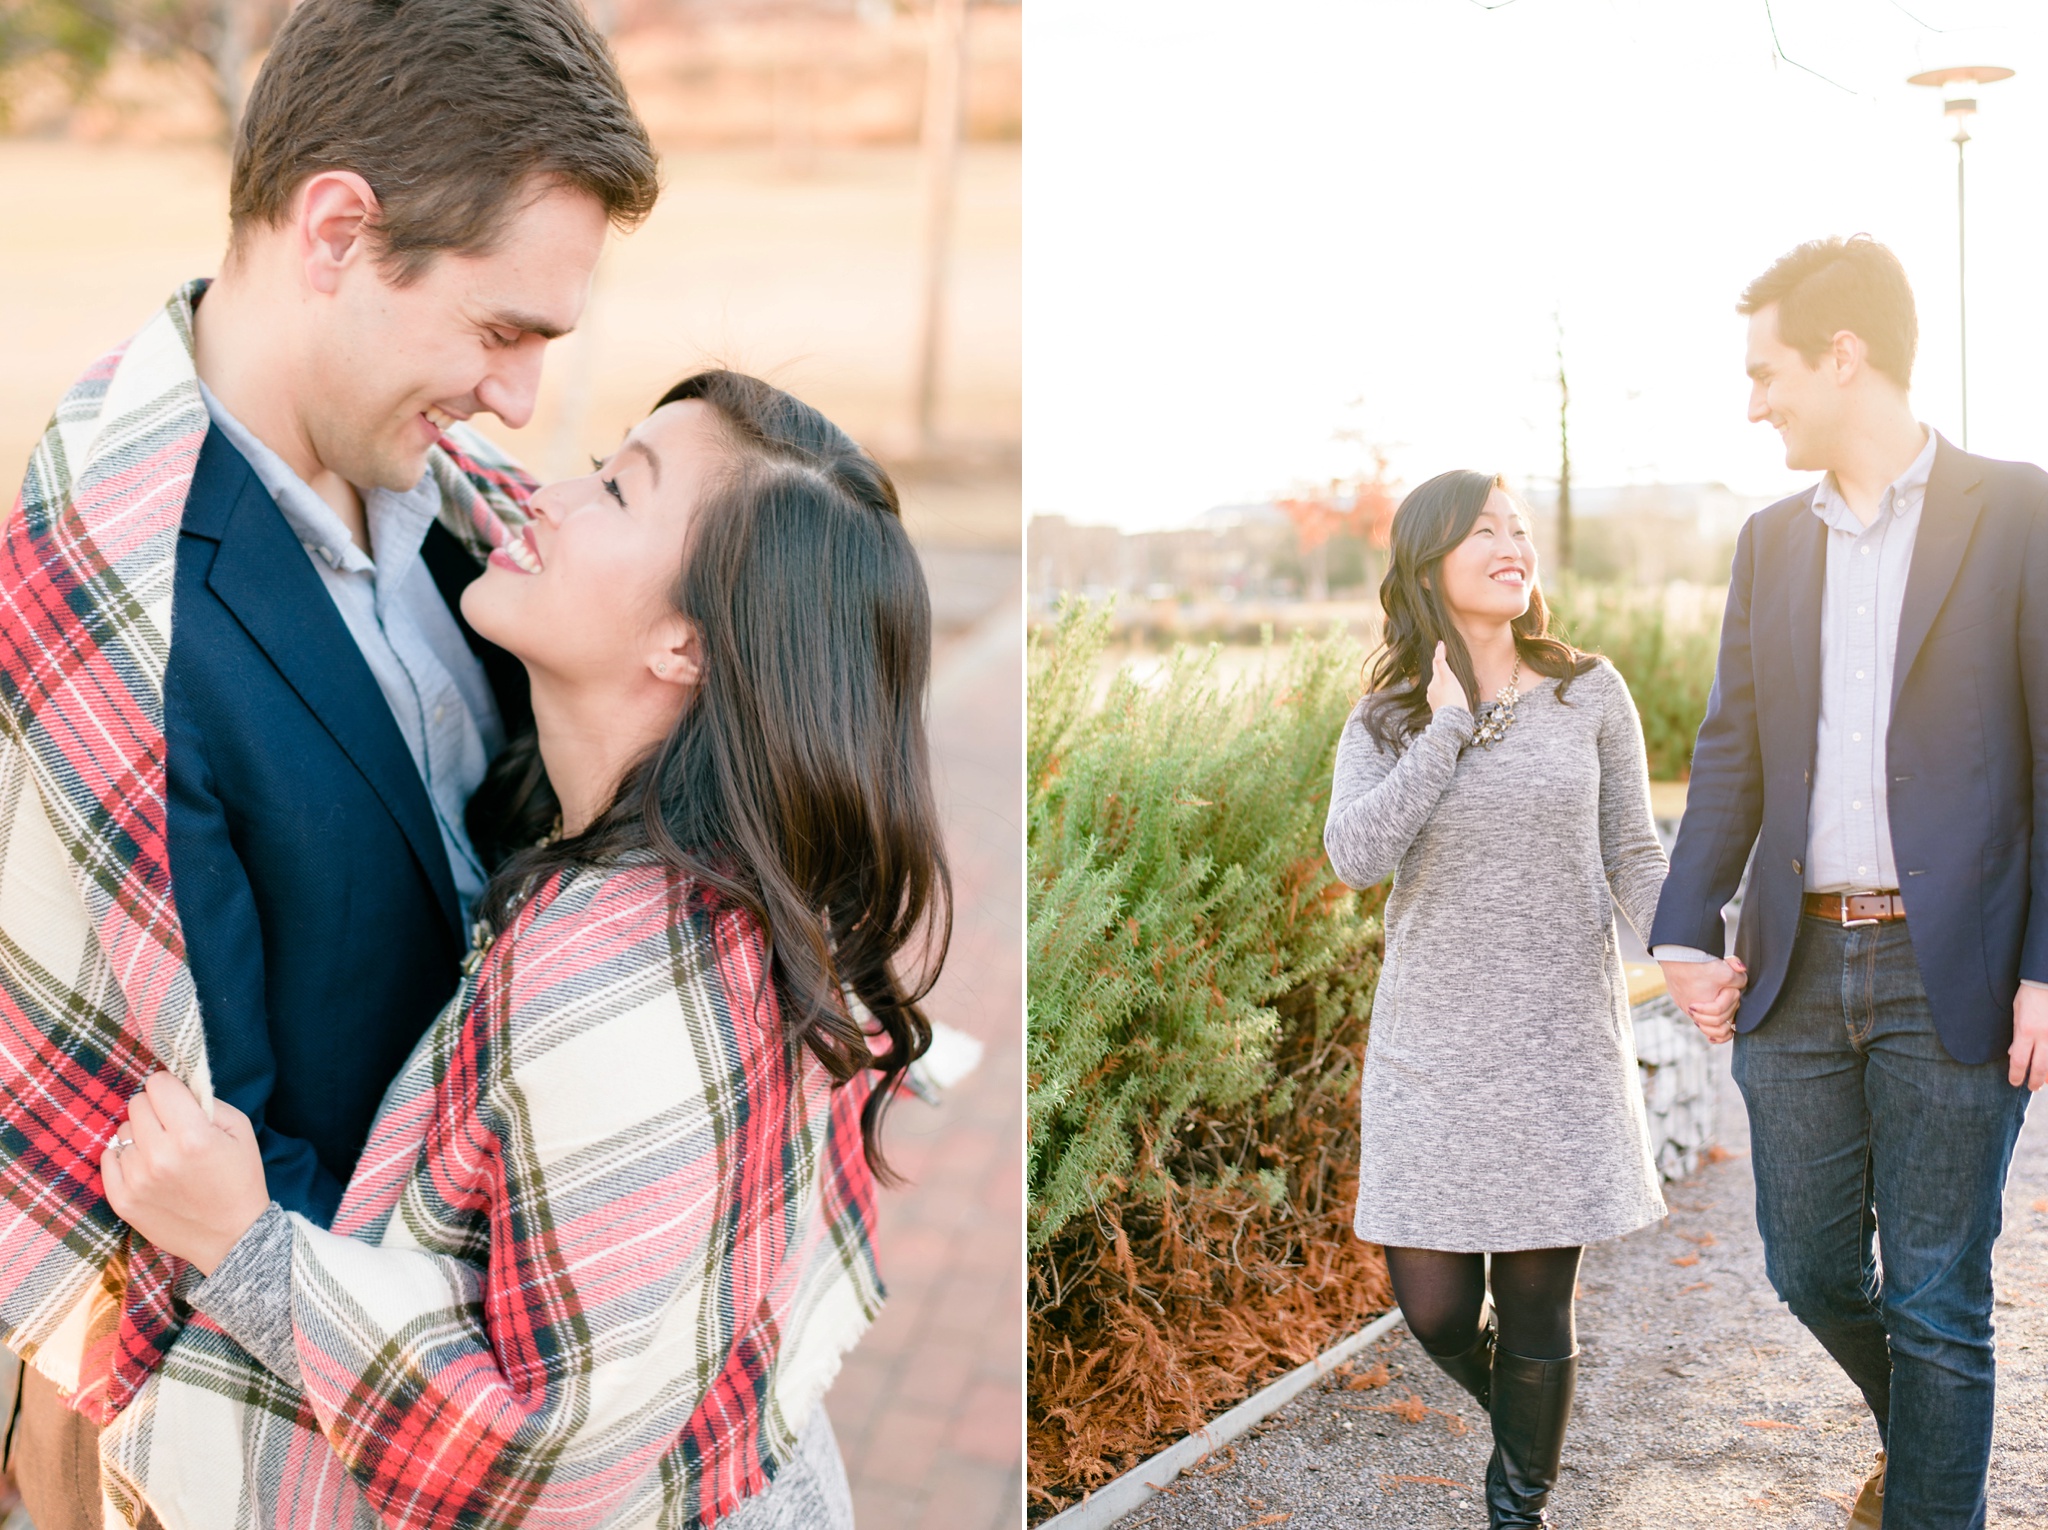 Downtown Nice to Have You in Birmingham Engagement Session| Birmingham Alabama Wedding Photographers_0021.jpg